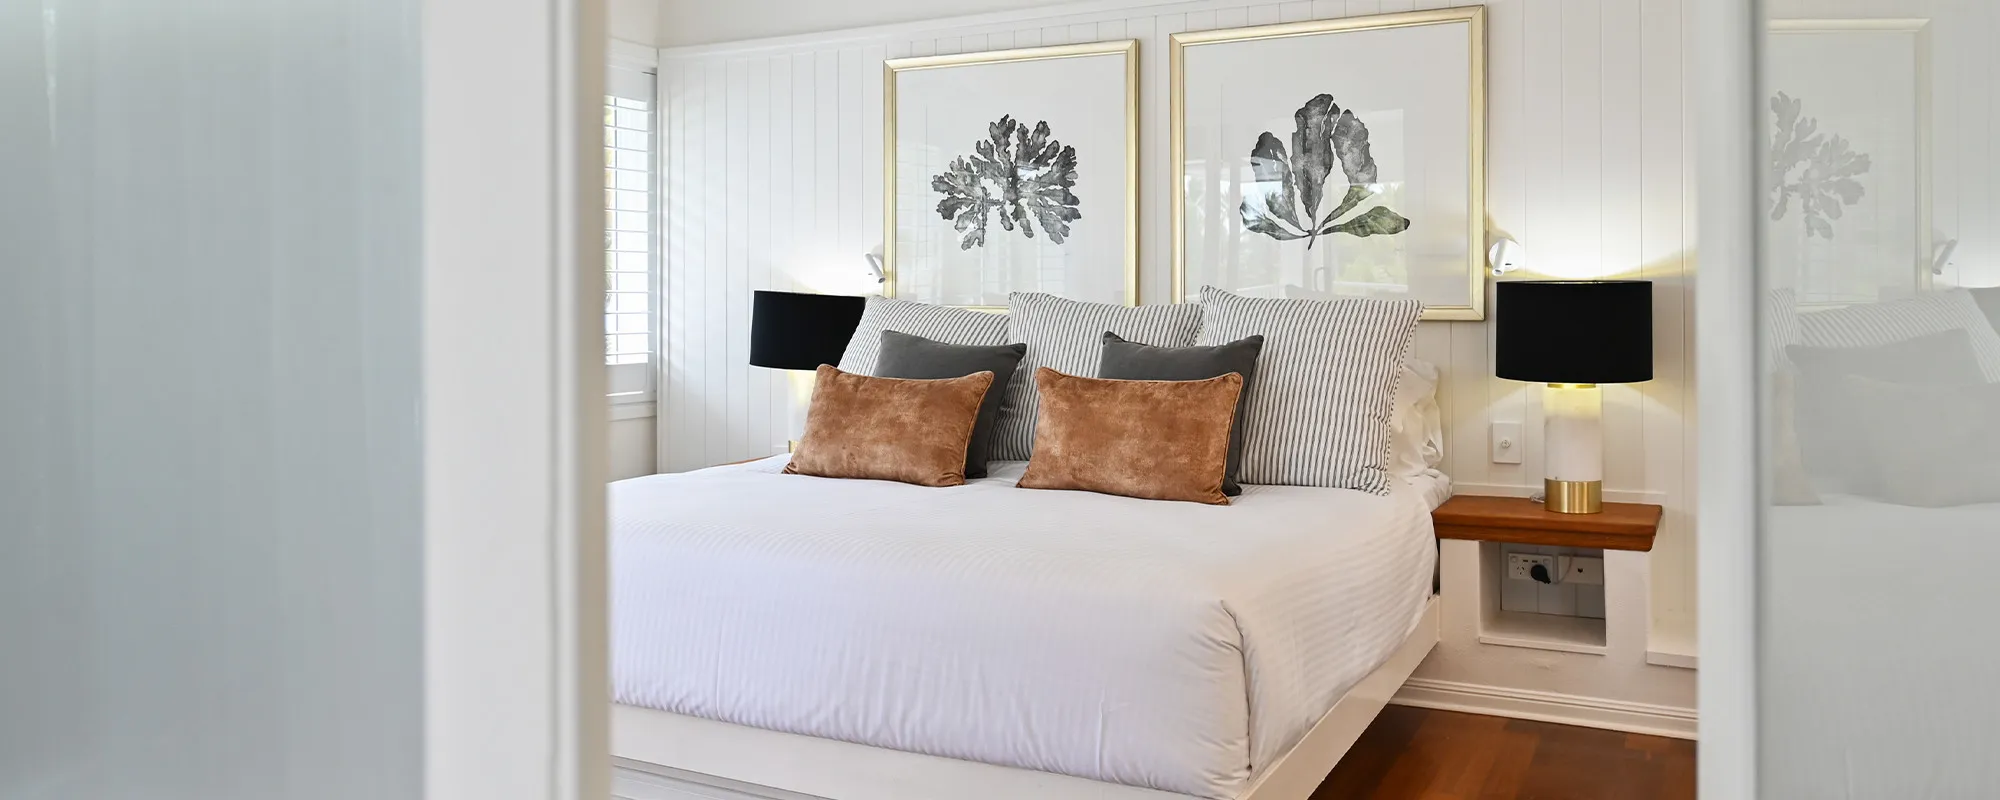 Alamanda Palm Cove by Lancemore Boutique Luxury Accommodation Three Bedroom Apartment 2000 x 800 3